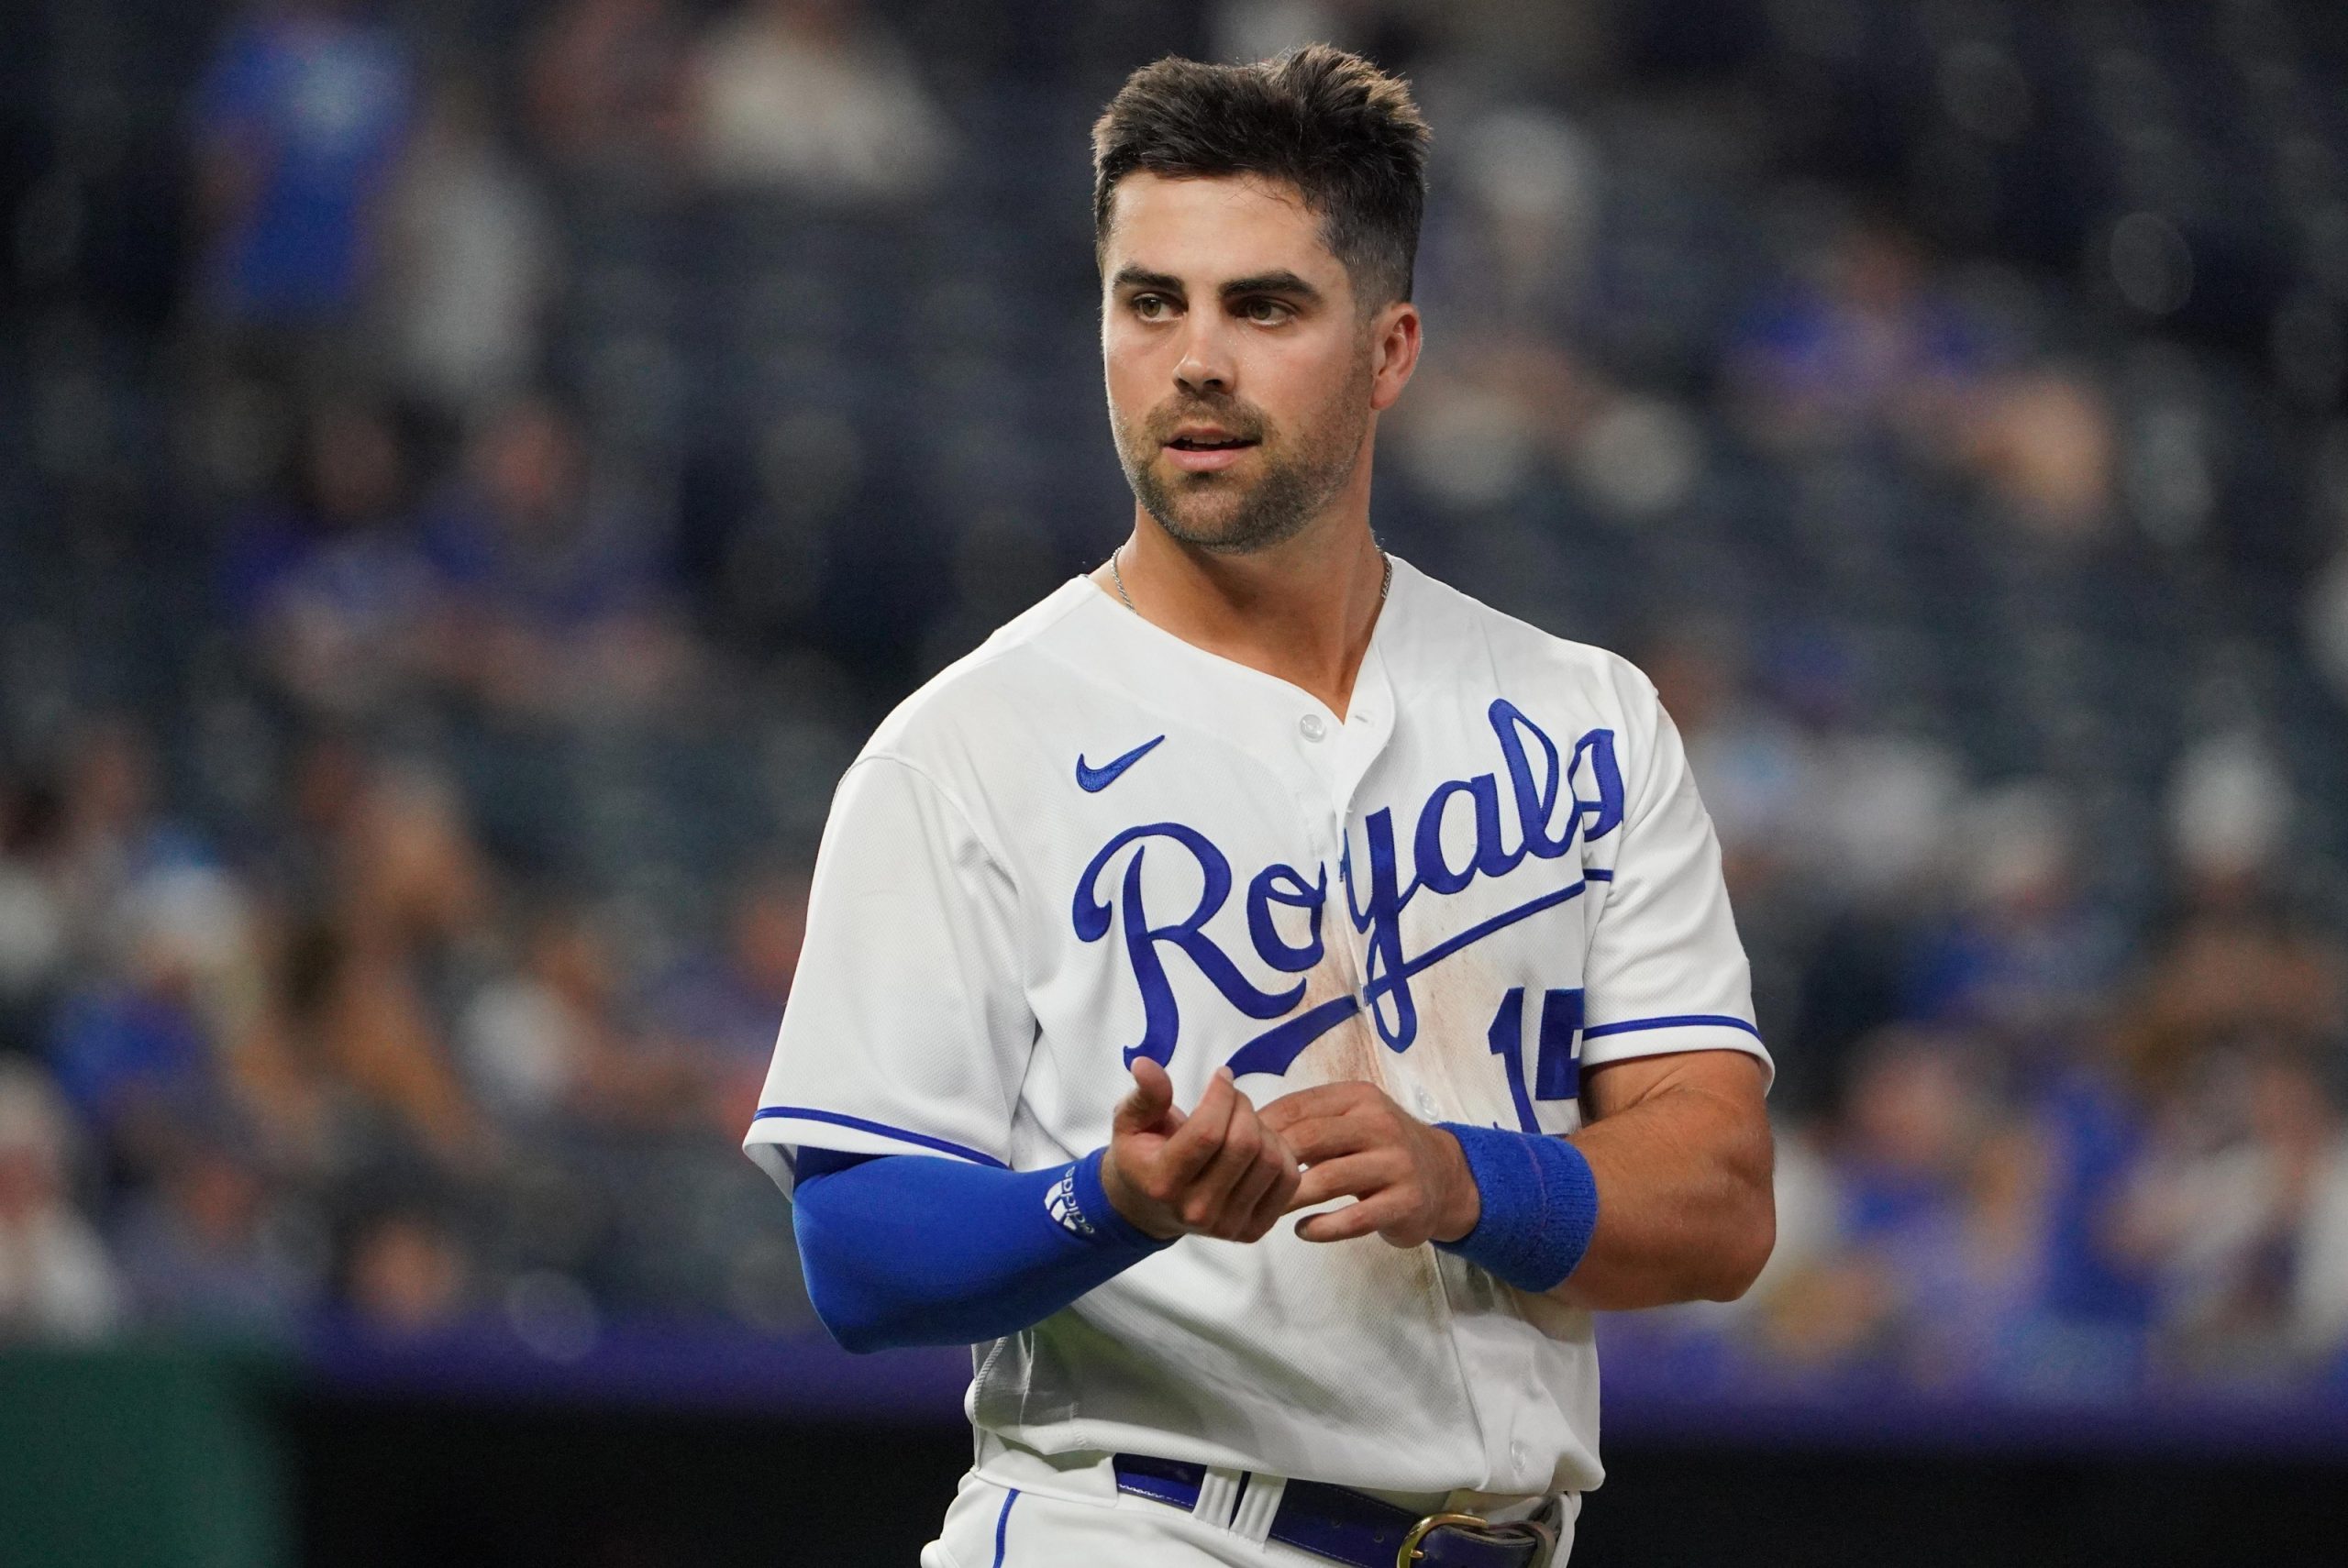 Whit Merrifield Family, Wedding Pictures, Wife Instagram - ABTC